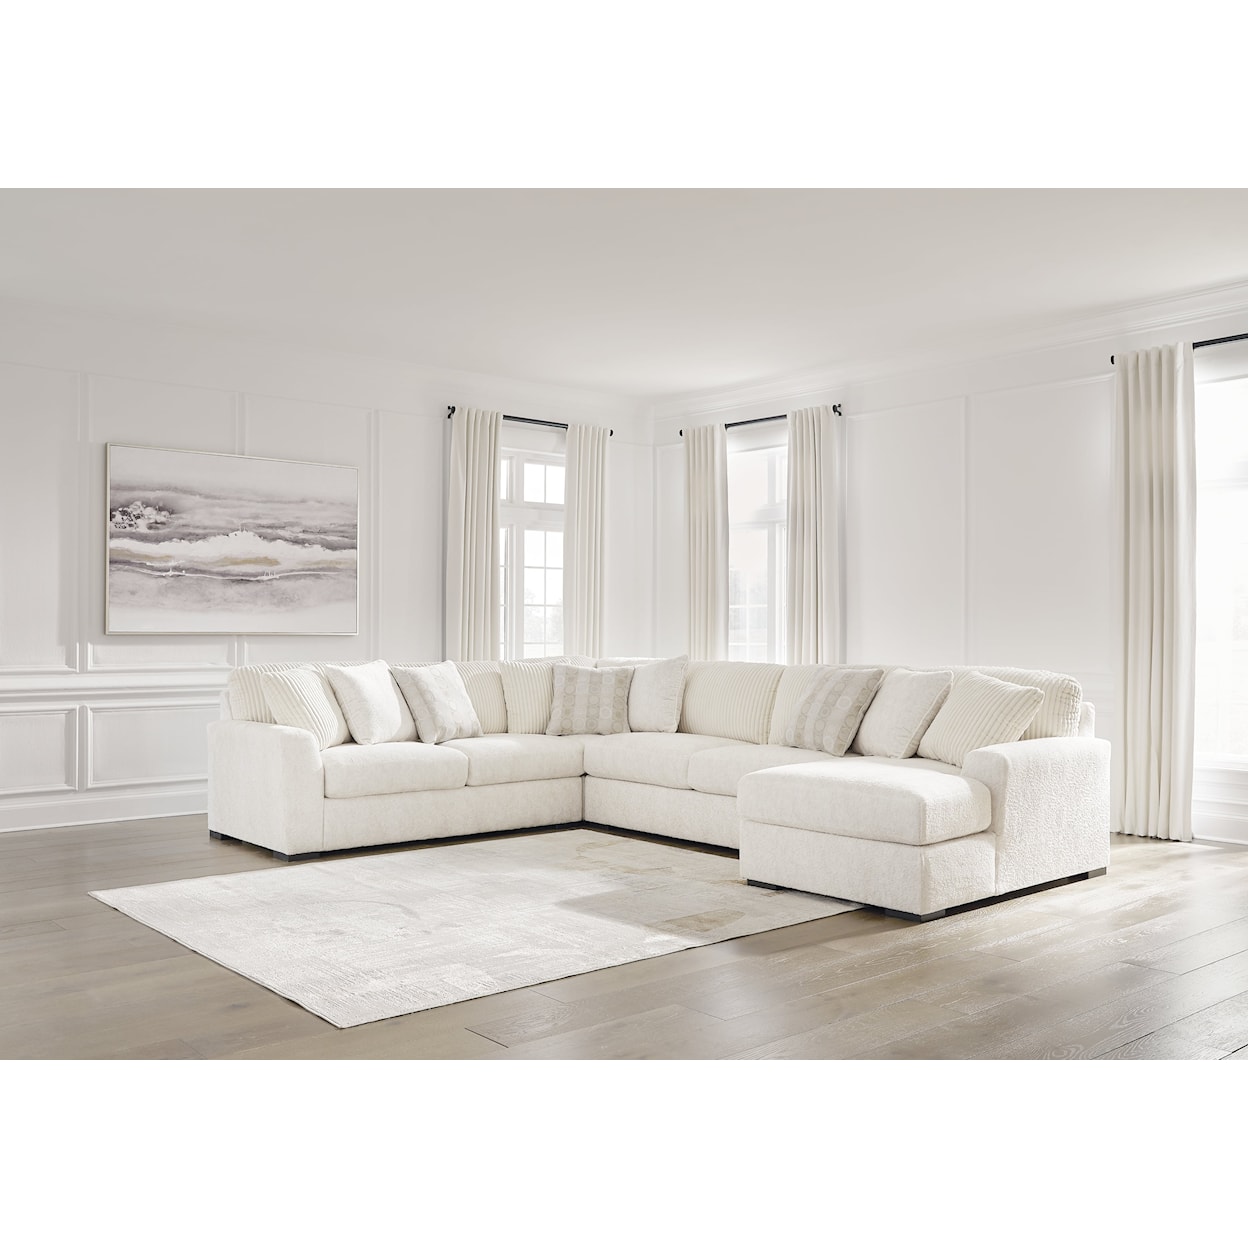 Ashley Furniture Signature Design Chessington 4-Piece Sectional With Chaise